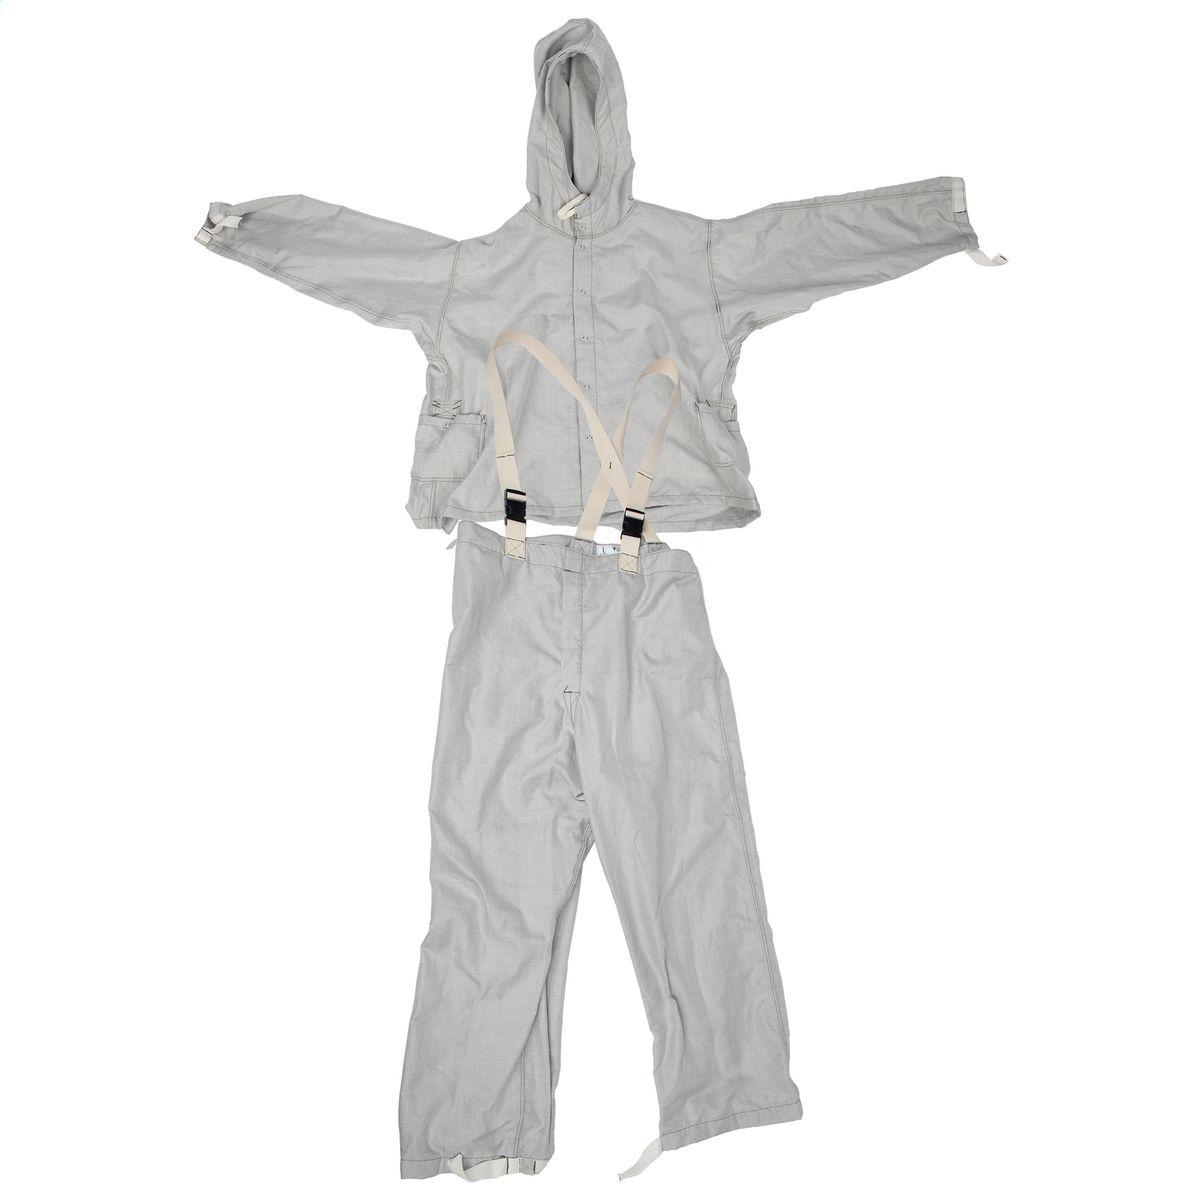 Hubbell C4020534 CONDUCTIVE SUIT, LARGE, Born of a need to let the lineman get closer to his work, Chance EHV Barehand Conductive Clothing replaces hand tools on the end of 16-foot Epoxiglas� poles- the clothing is bonded to the conductor, placing the lineman within the f